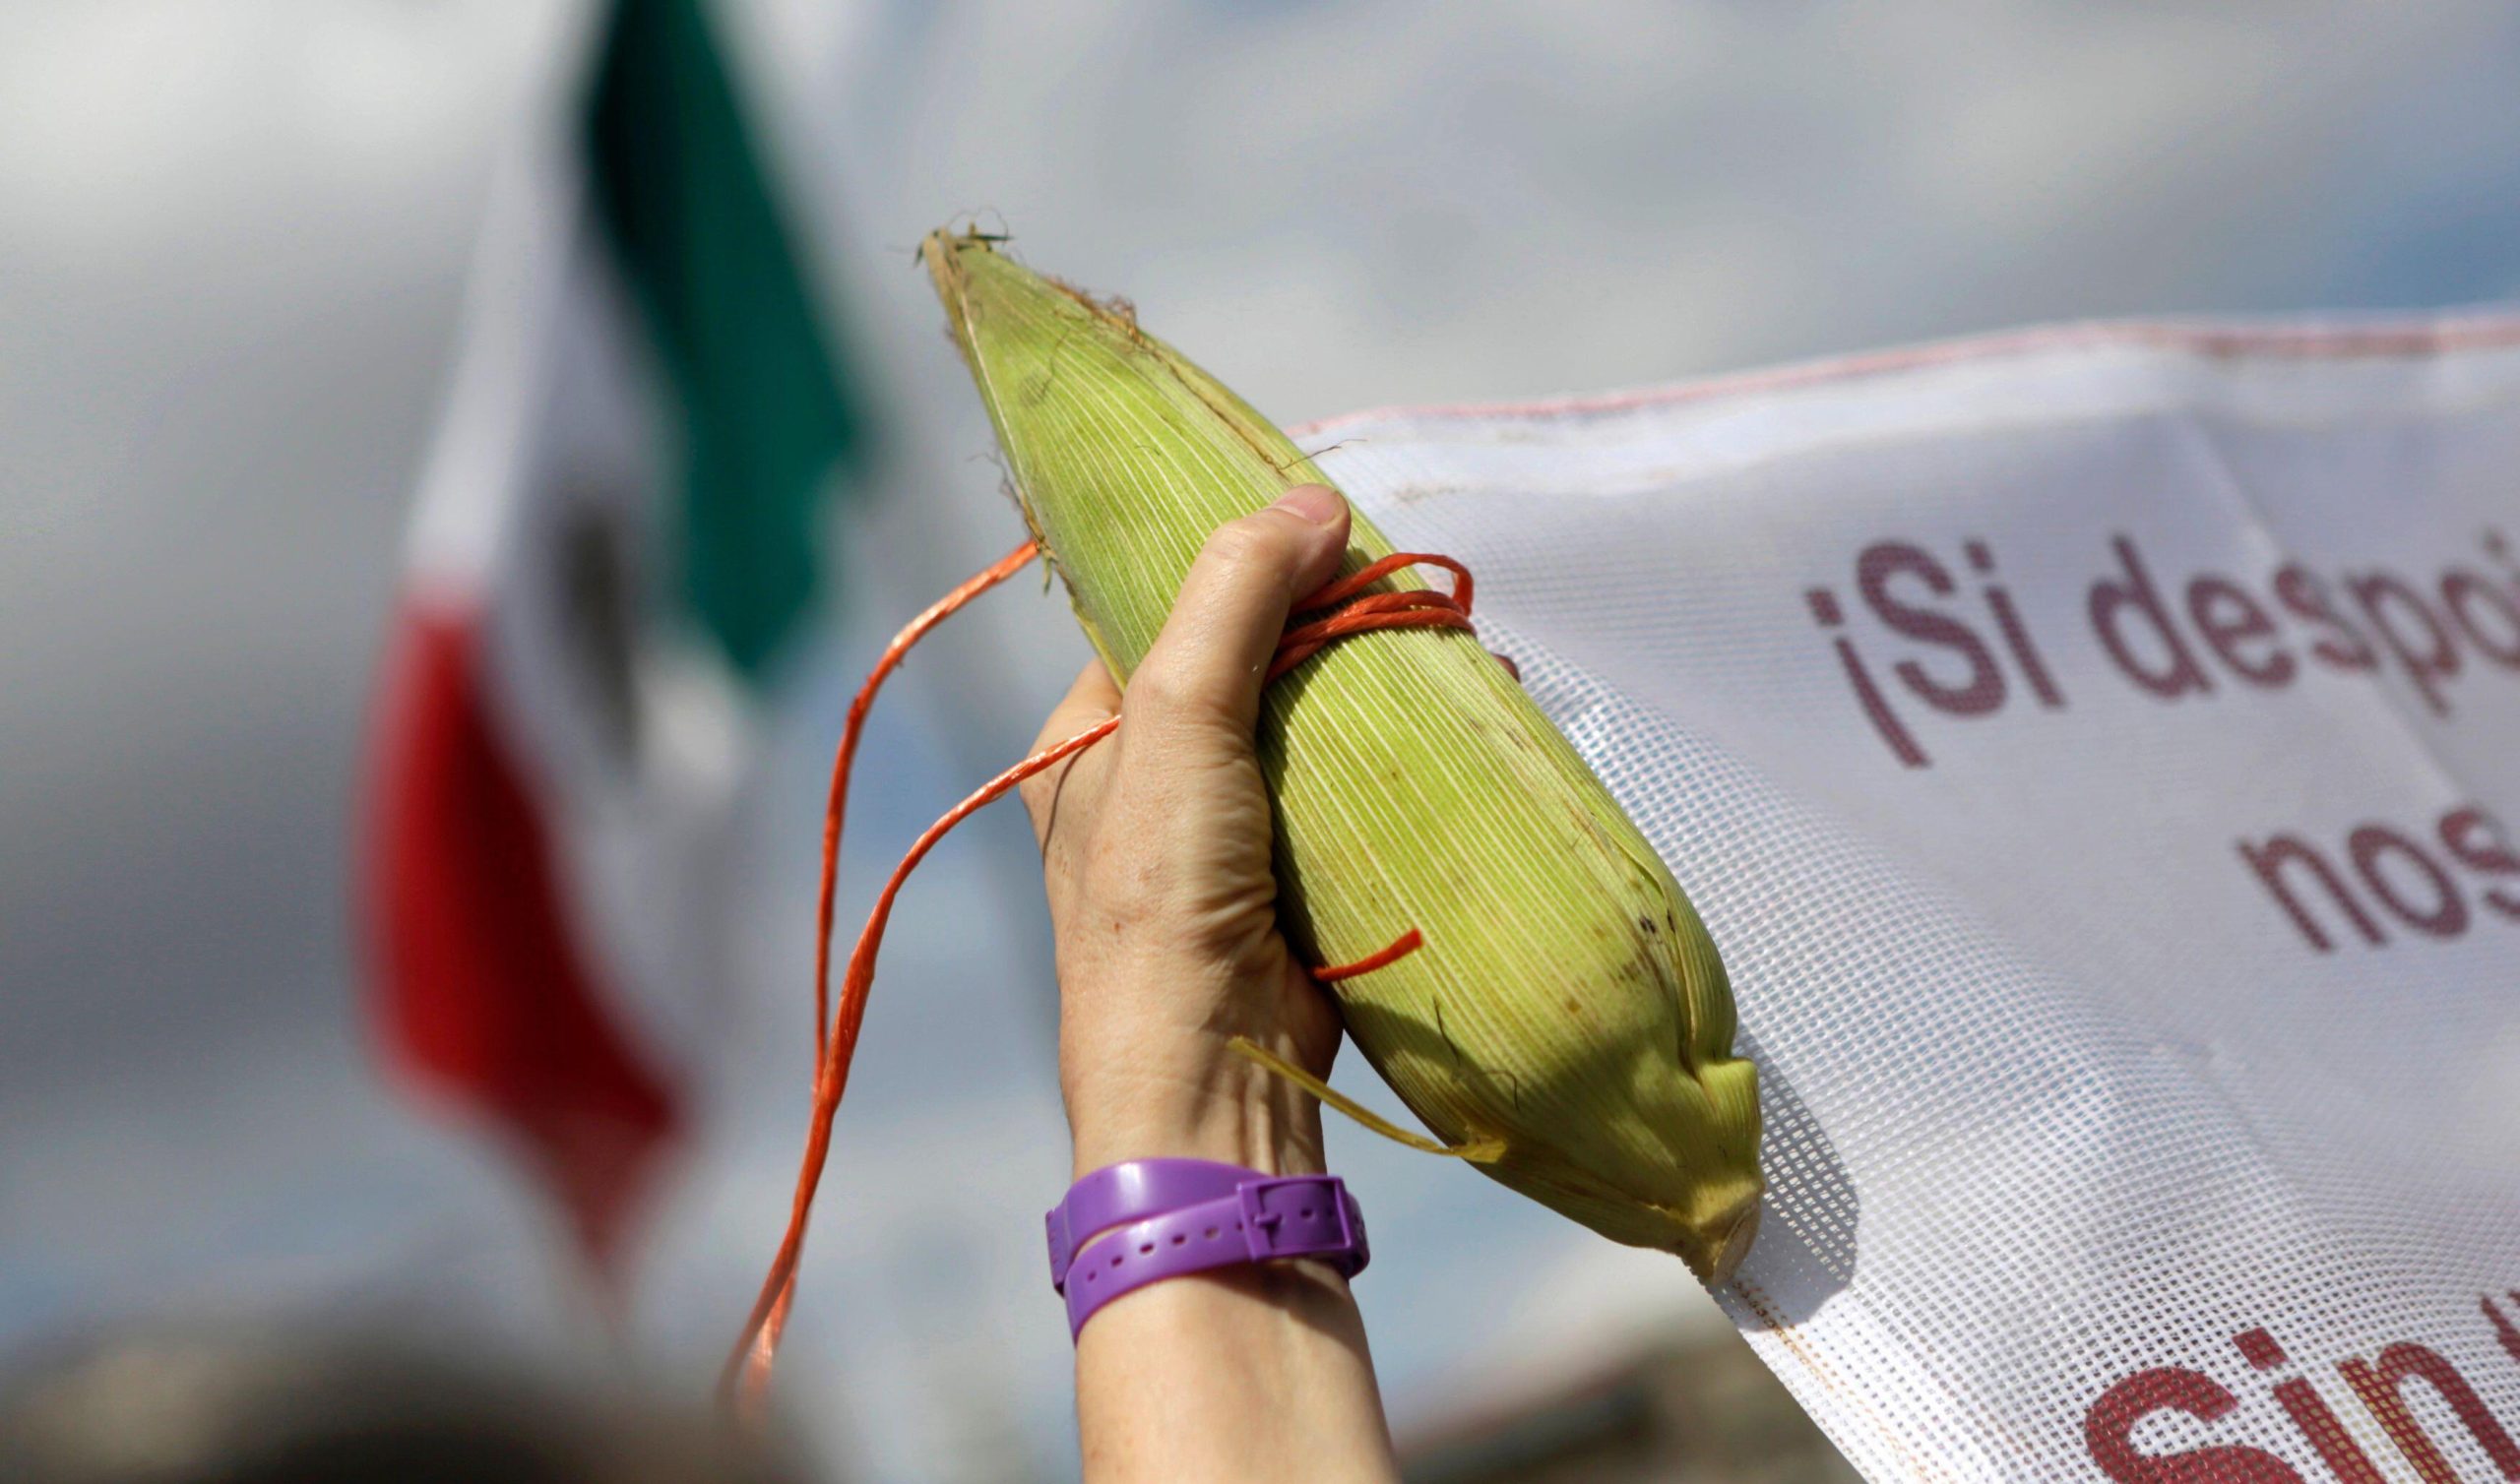 <p>A demonstrator holds up a corn cob at a protest against Monsanto in Mexico City in 2014, led by the Sin Maíz No Hay Pais campaign. Genetically modified (GM) crops have long been a controversial issue in Mexico, and recent developments have seen the government show support for the anti-GM movement. (Image: Henry Romero / Alamy)</p>